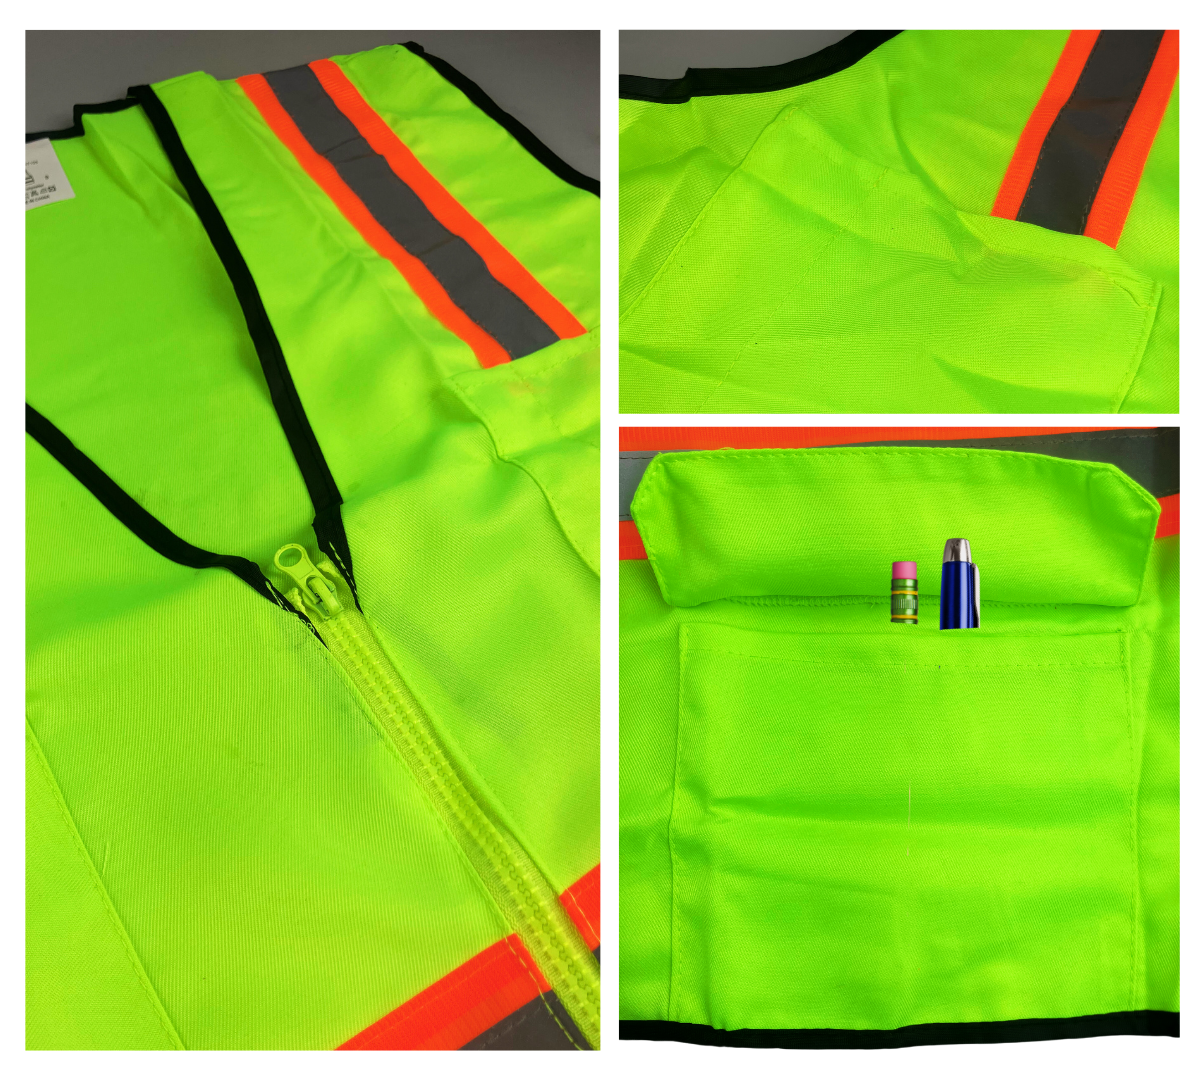 Bright Neon Green Safety Vest with Reflective Stripes - 2X Large  - SF-83718